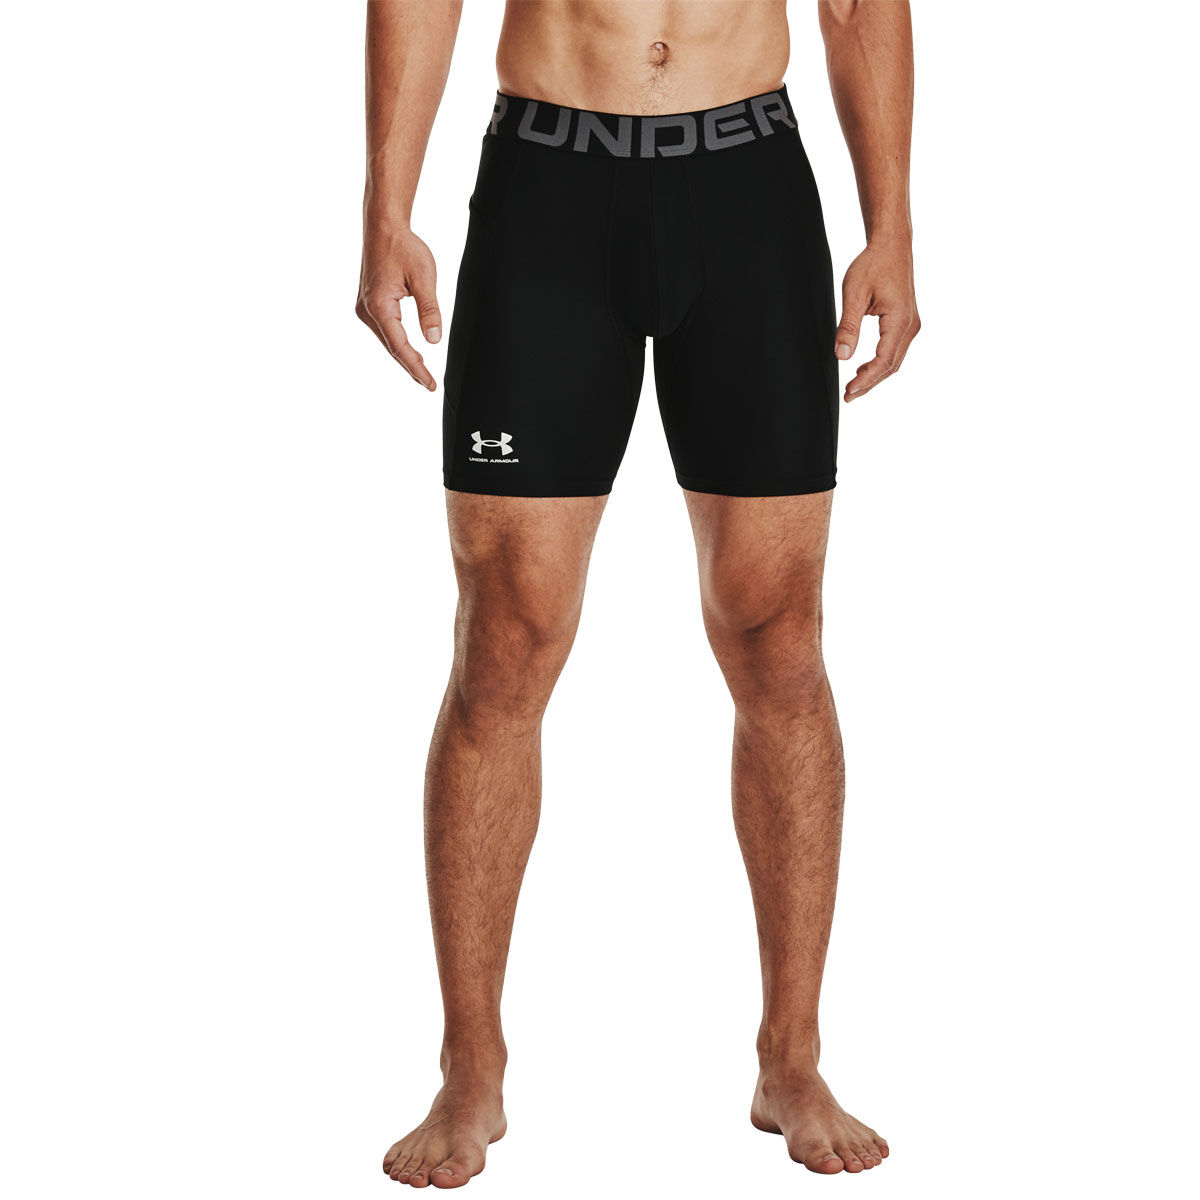 Men's Compression Clothing, Tights, Shorts & Tops